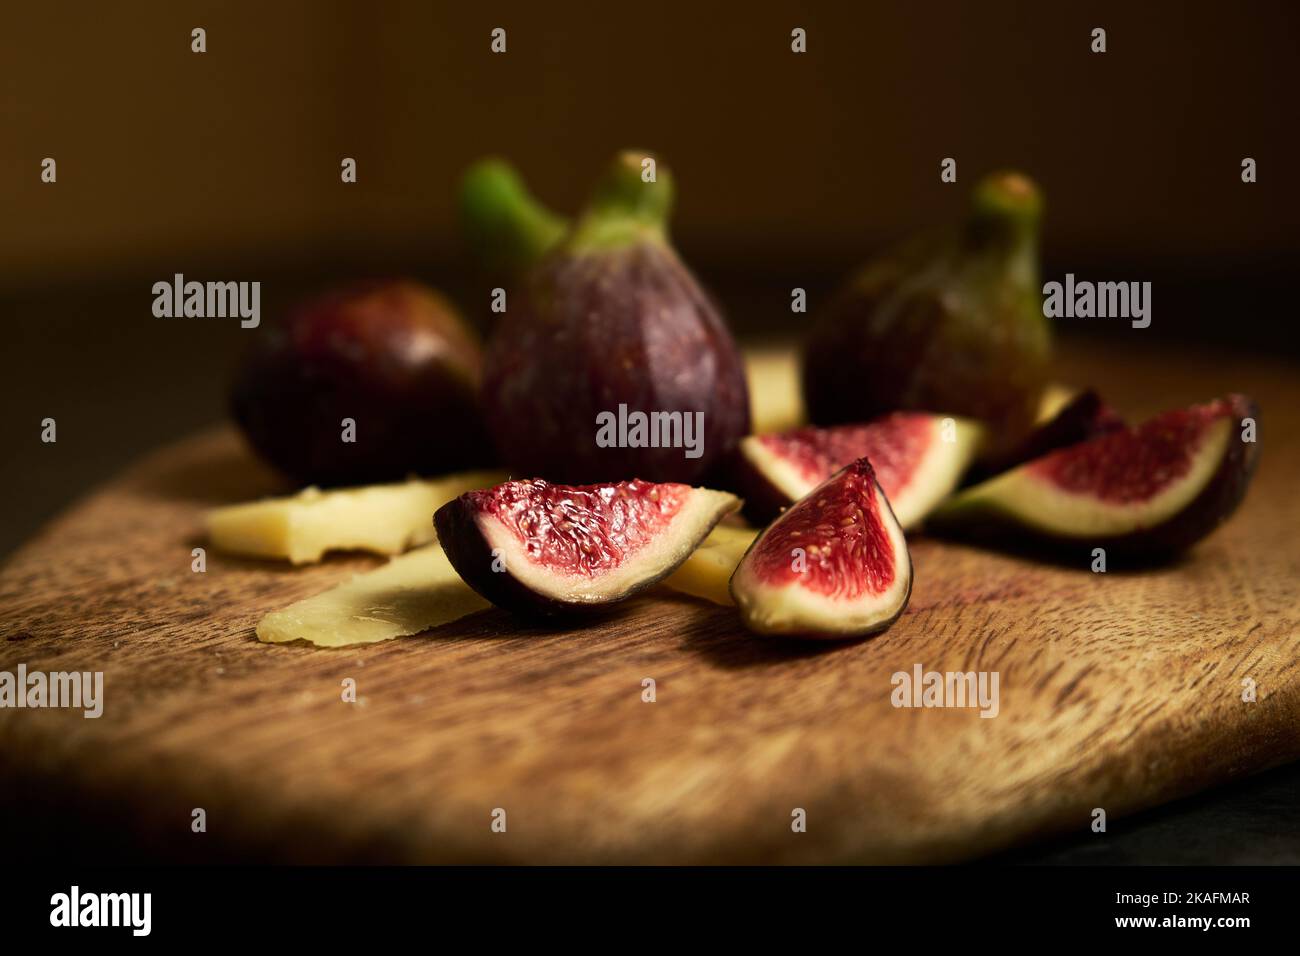 sliced figs on a wooden board Stock Photo